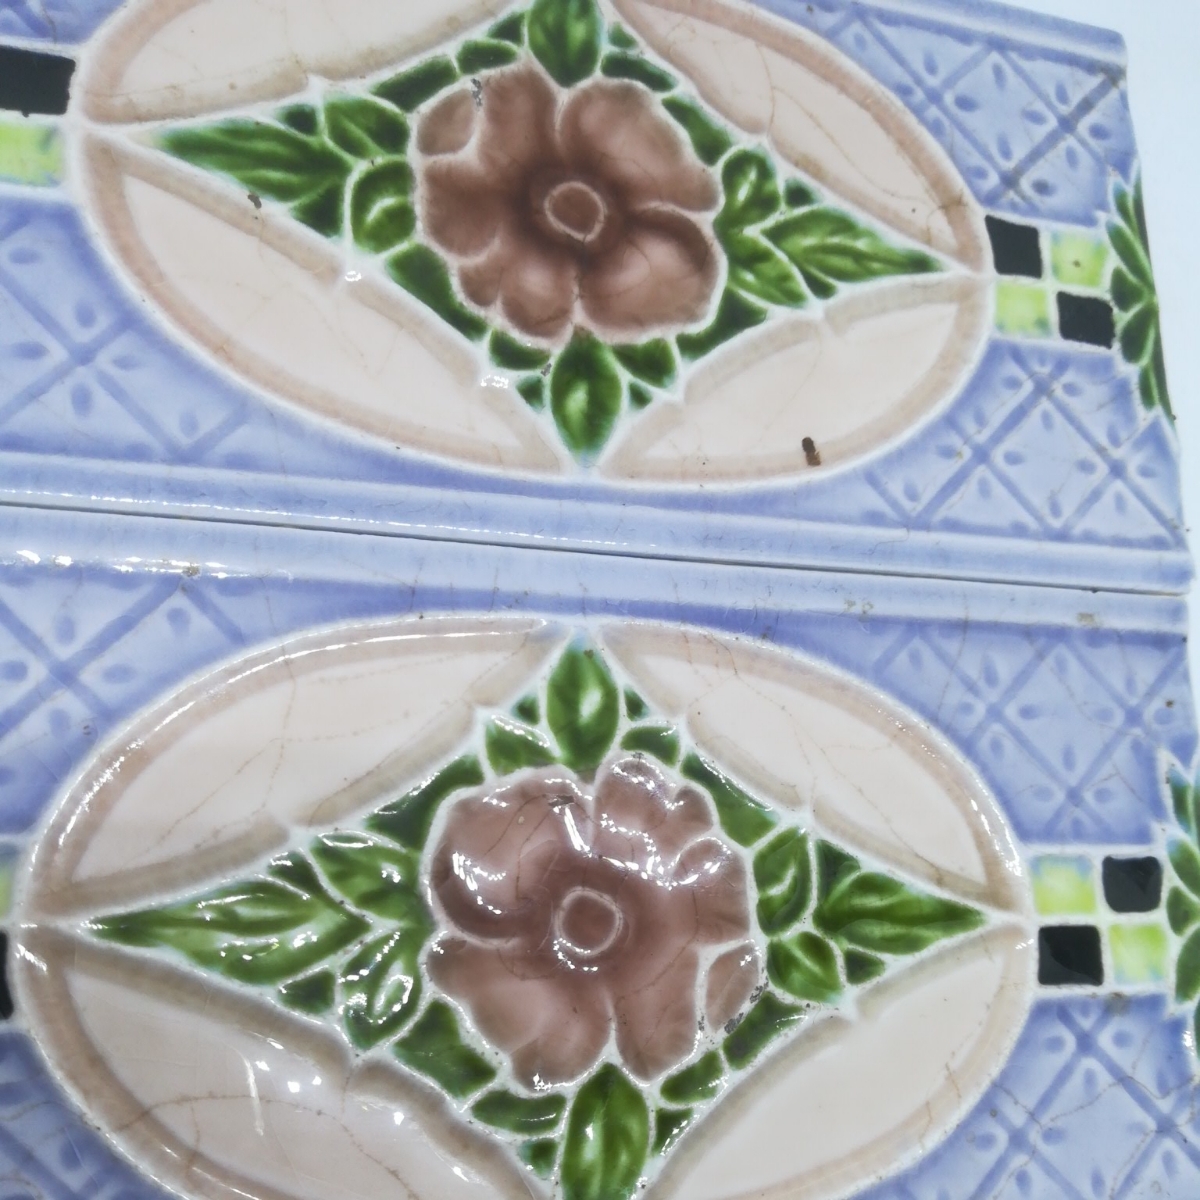 majo licca tile made in Japan Taisho romance antique goods .. goods approximately 100 year front export danto kaisha.saji2 pieces set 15.5-7.5cm antique Madein Japan India buy 9